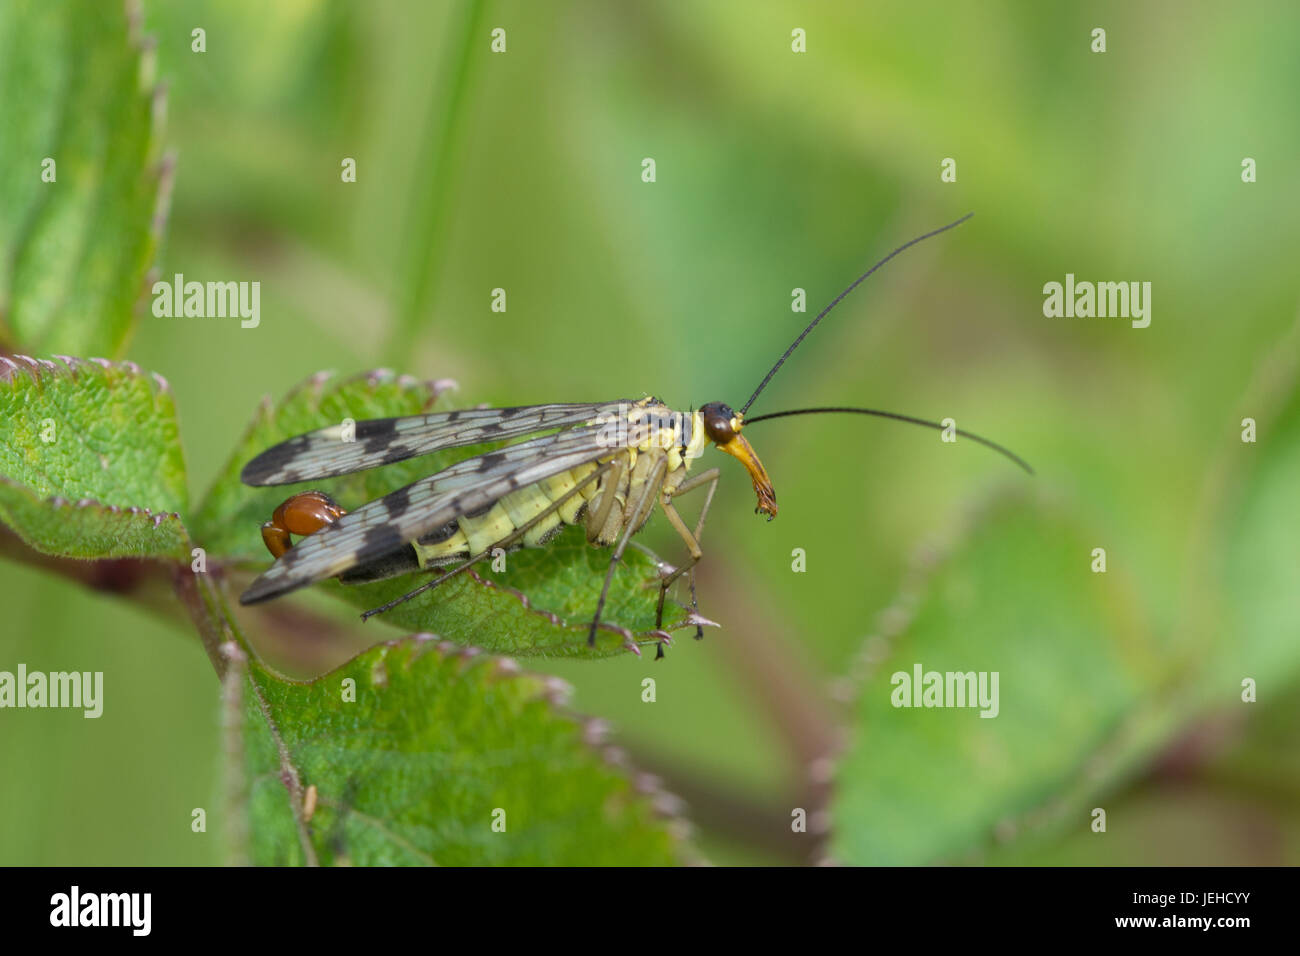 Close-up of scorpion fly (Panorpa species) Stock Photo